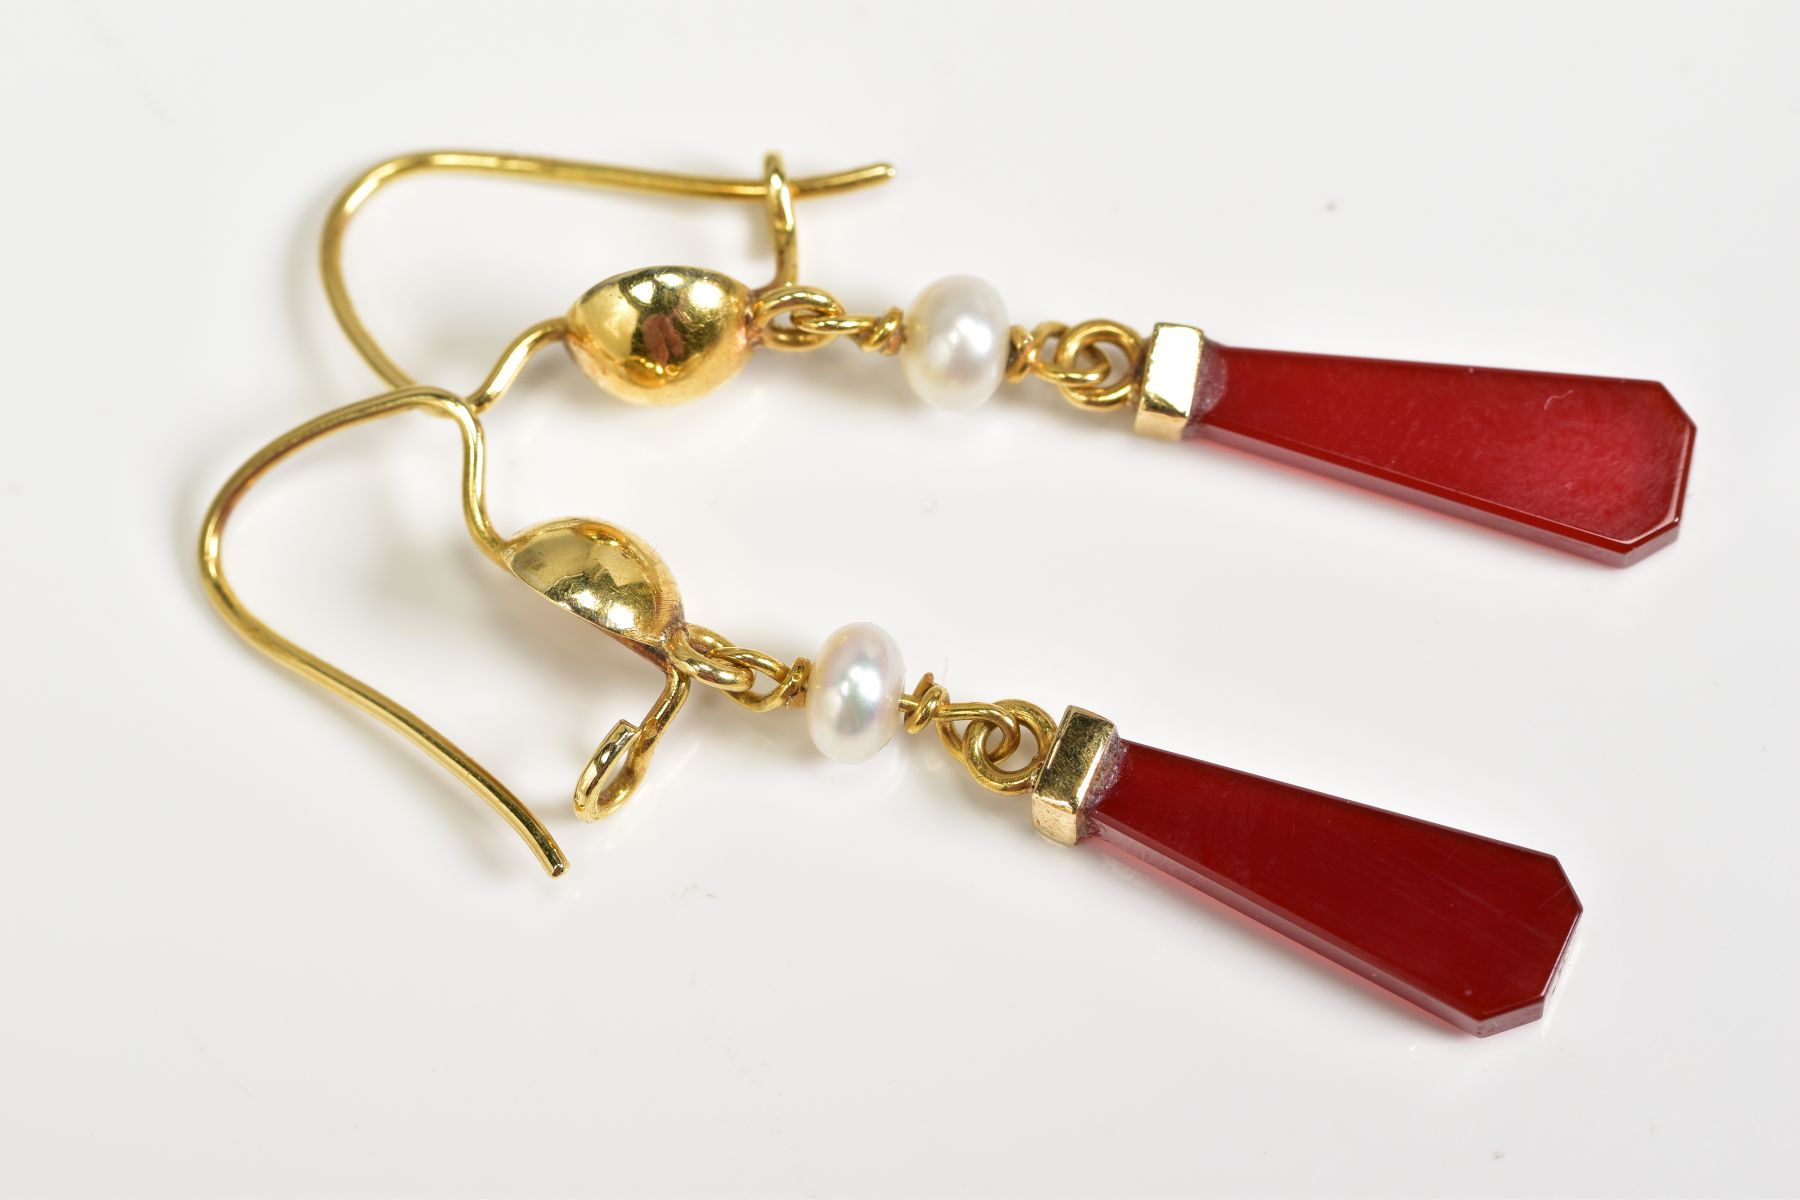 A PAIR OF CARNELIAN AND PEARL DROP EARRINGS, the yellow metal earrings each designed with a